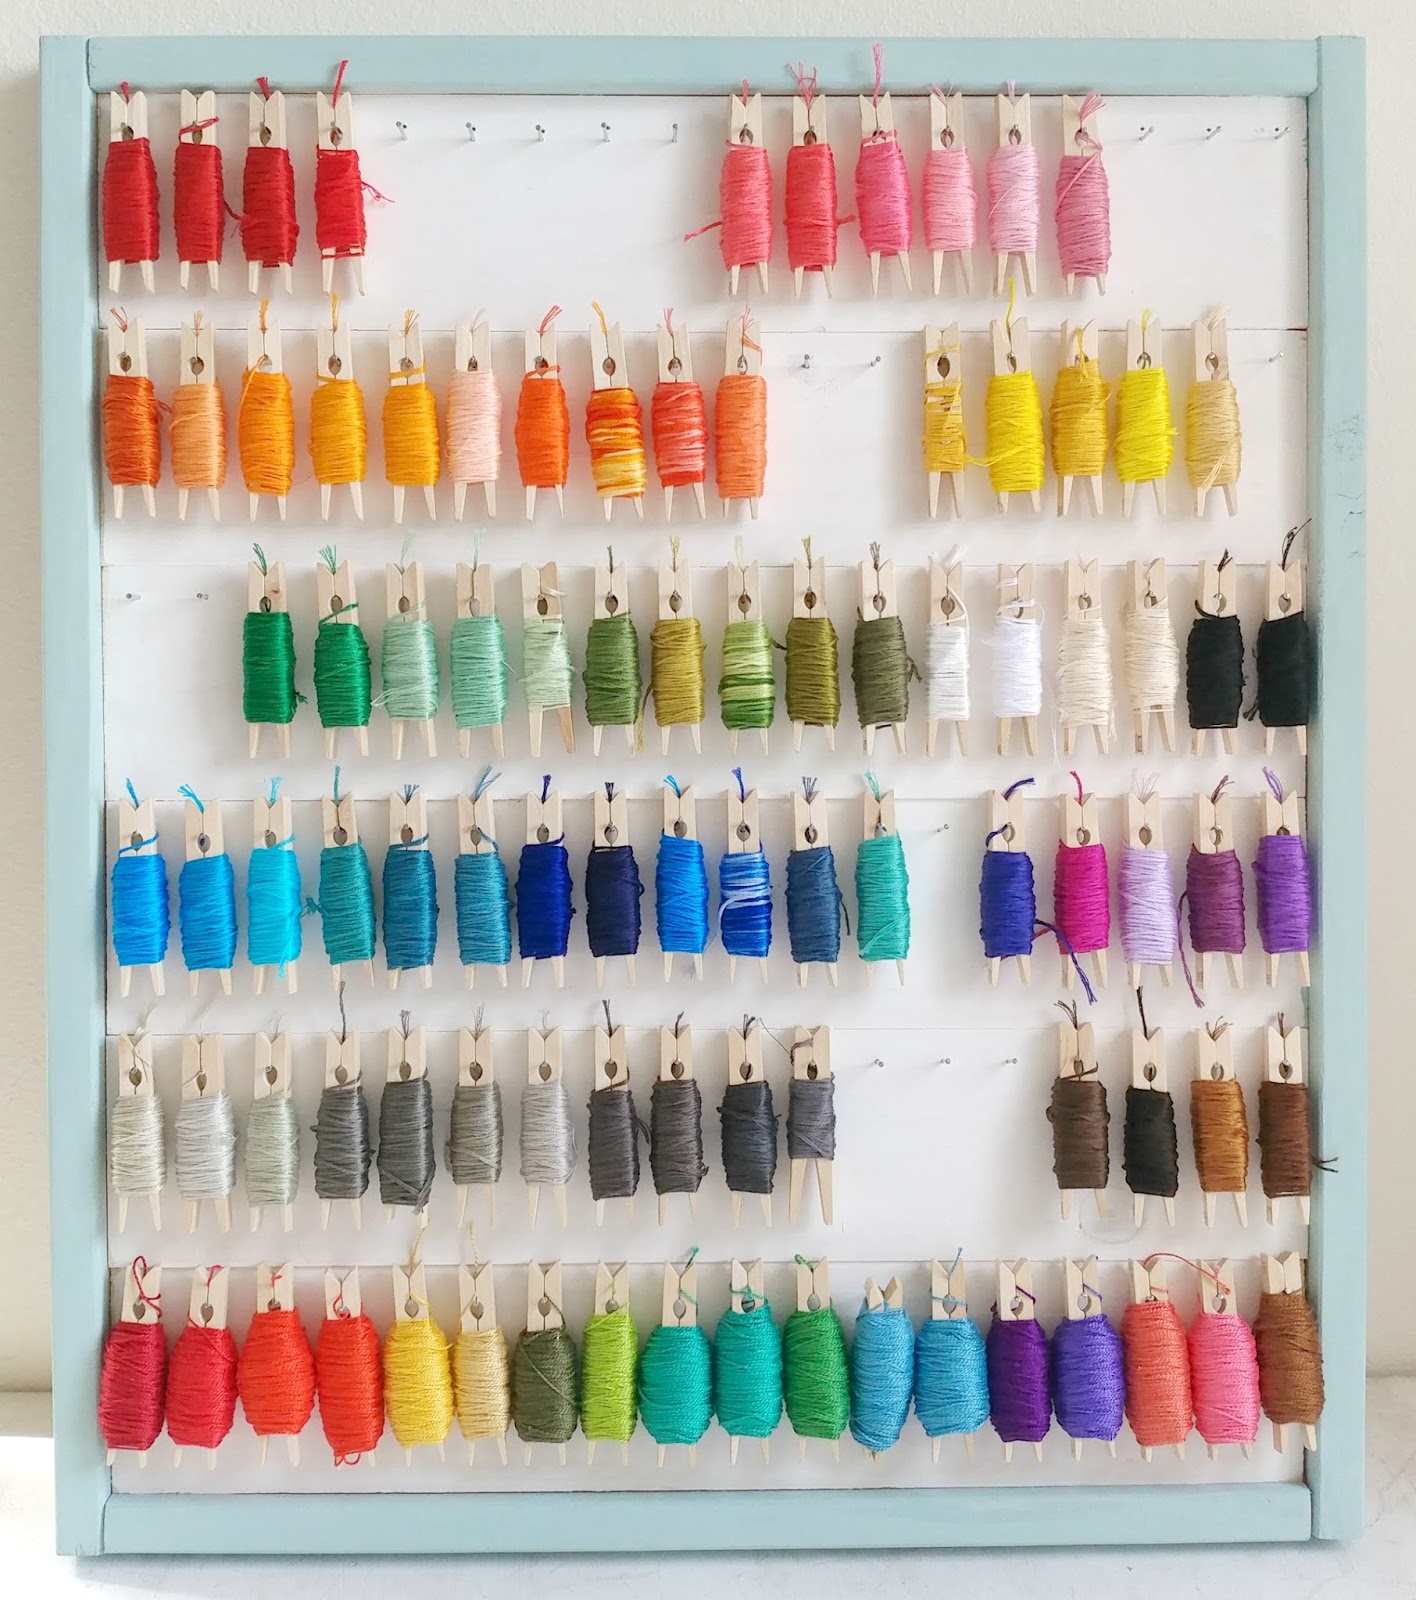 DIY Embroidery Floss Organizer using Clothespins - Ameroonie Designs